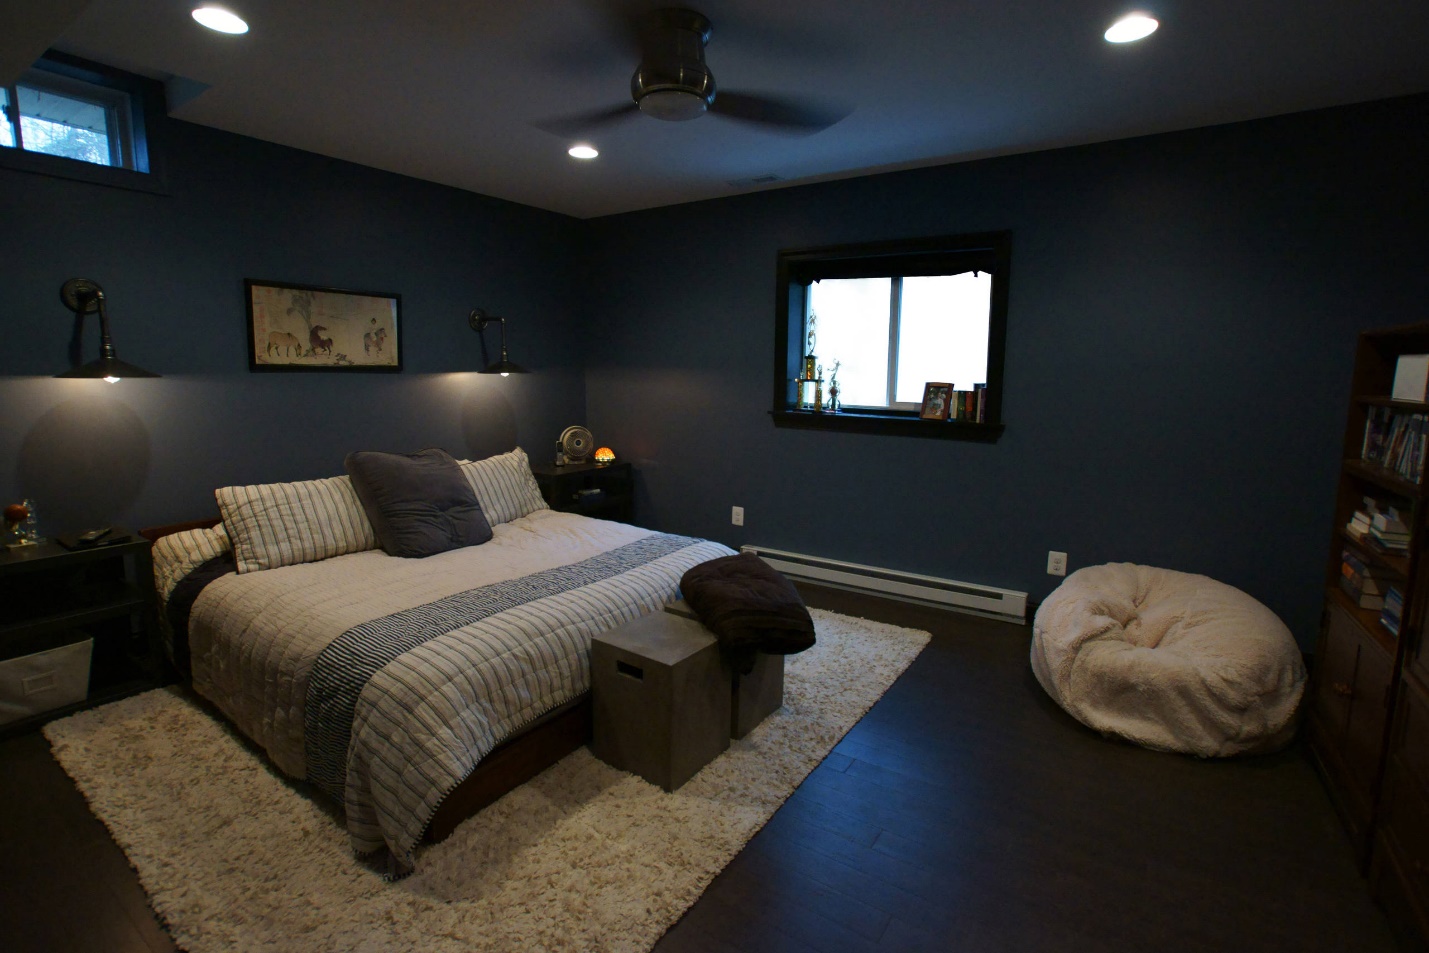 25 Aesthetic Basement Bedroom Ideas to Cozy You Up